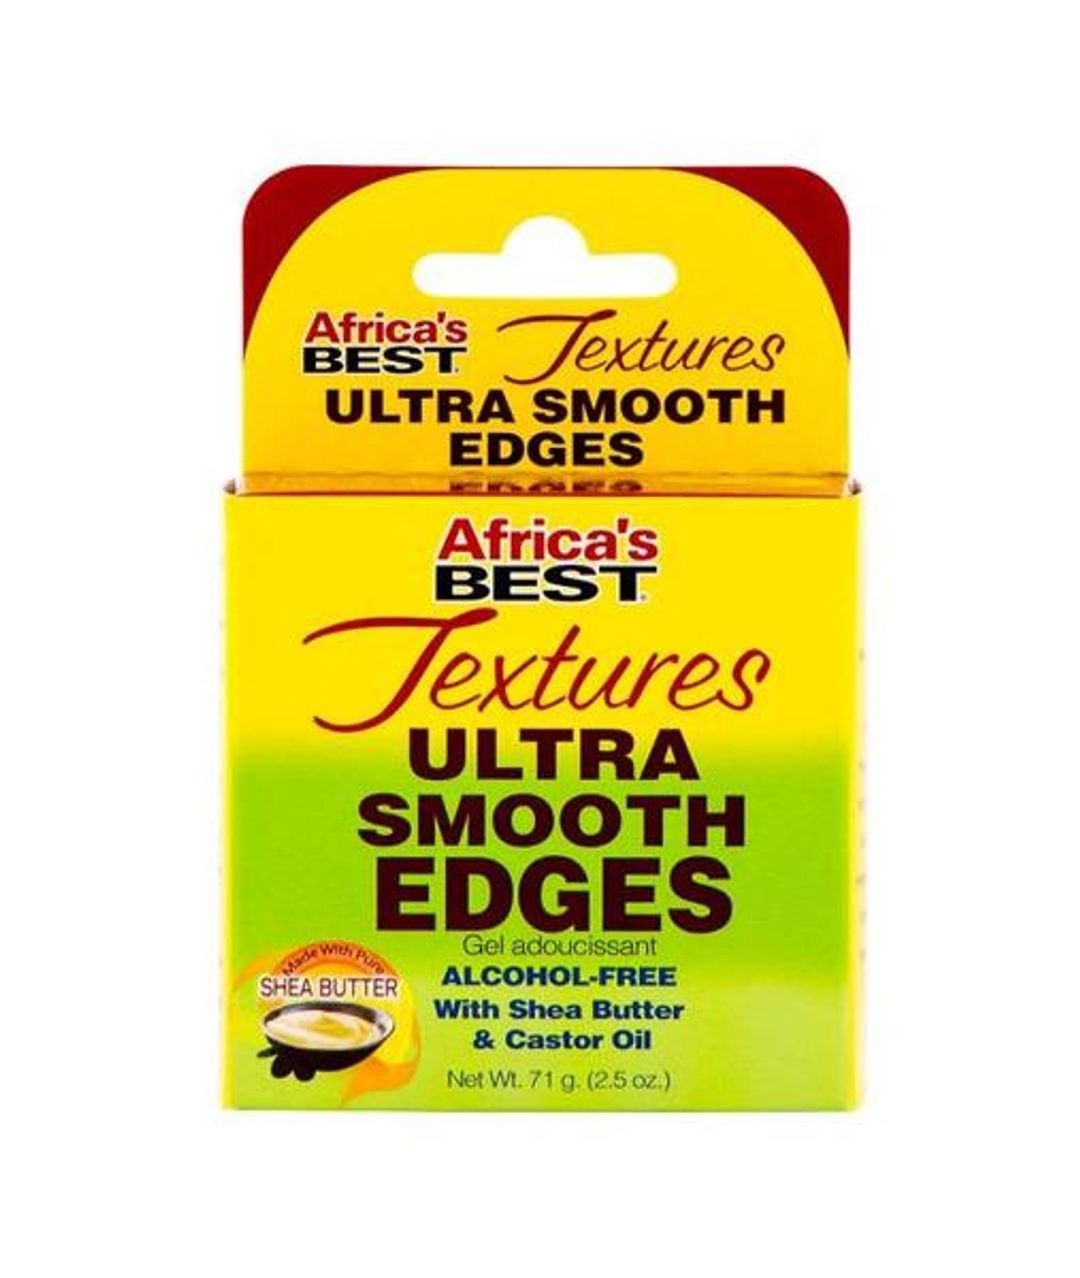 Africa's Best Textures Ultra Smooth Edges - 2.5oz